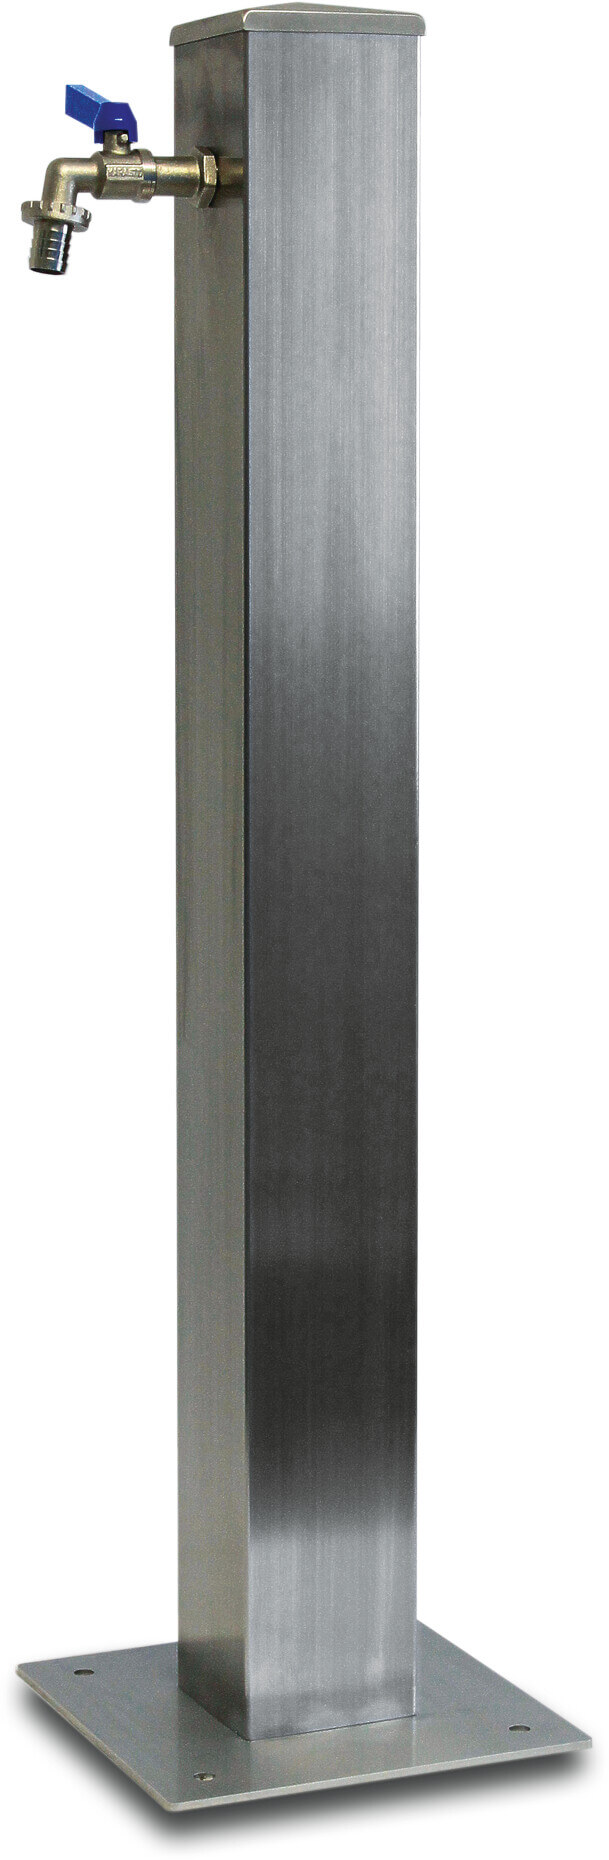 Profec Garden square column with tap stainless steel